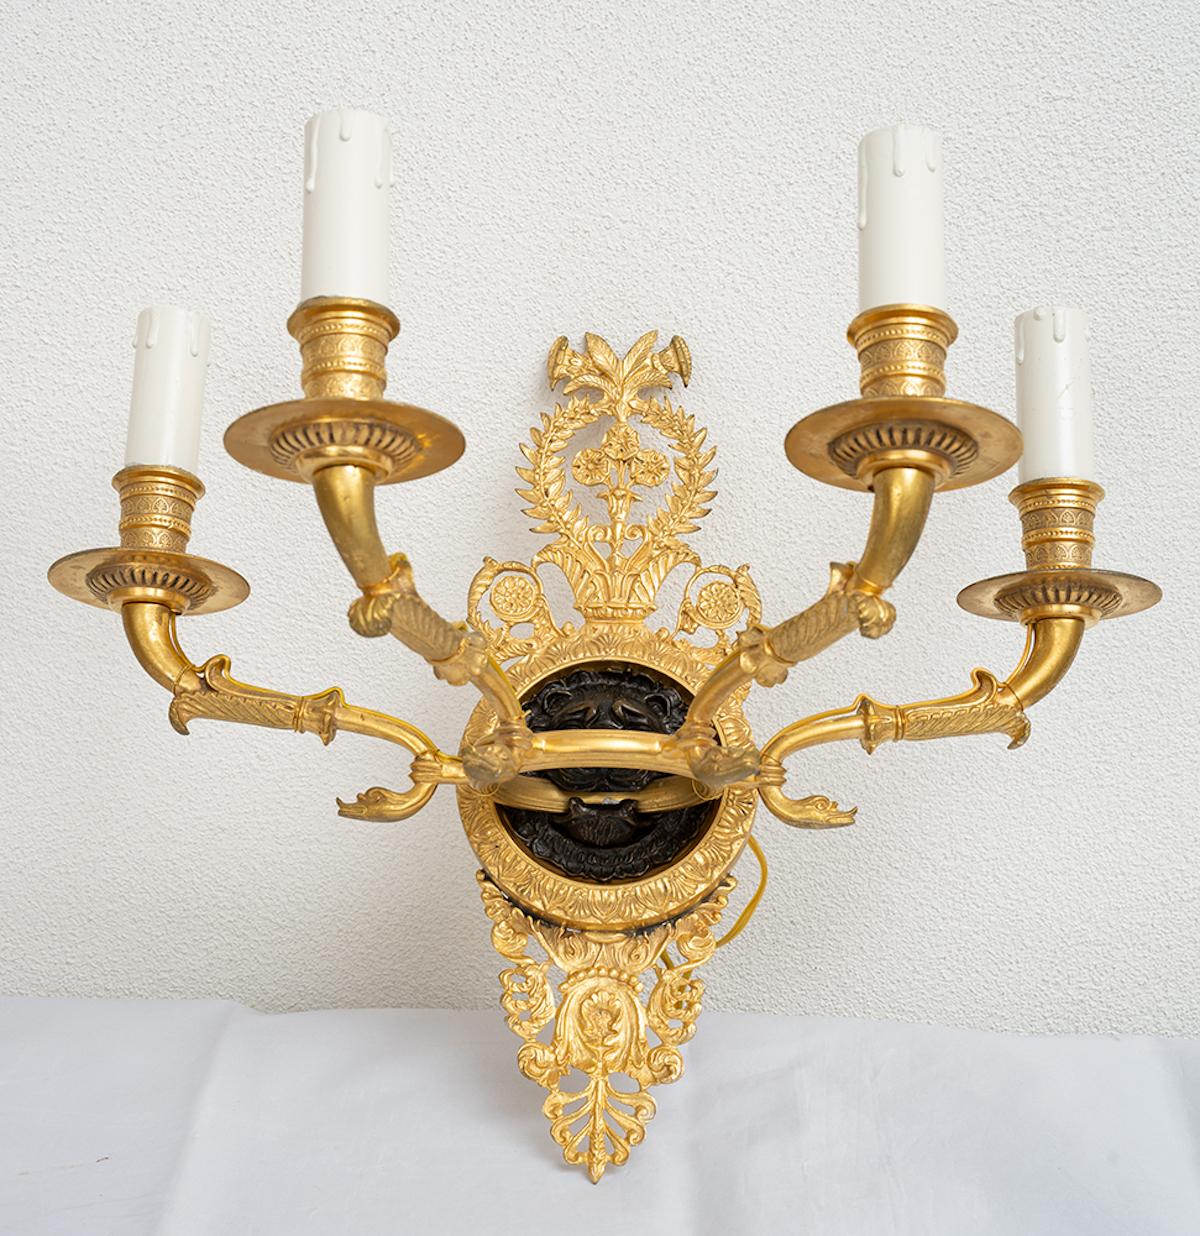 Antique French Empire gilt bronze and patinated bronze wall sconce. 19th Century - Gold Figurative Sculpture by Unknown